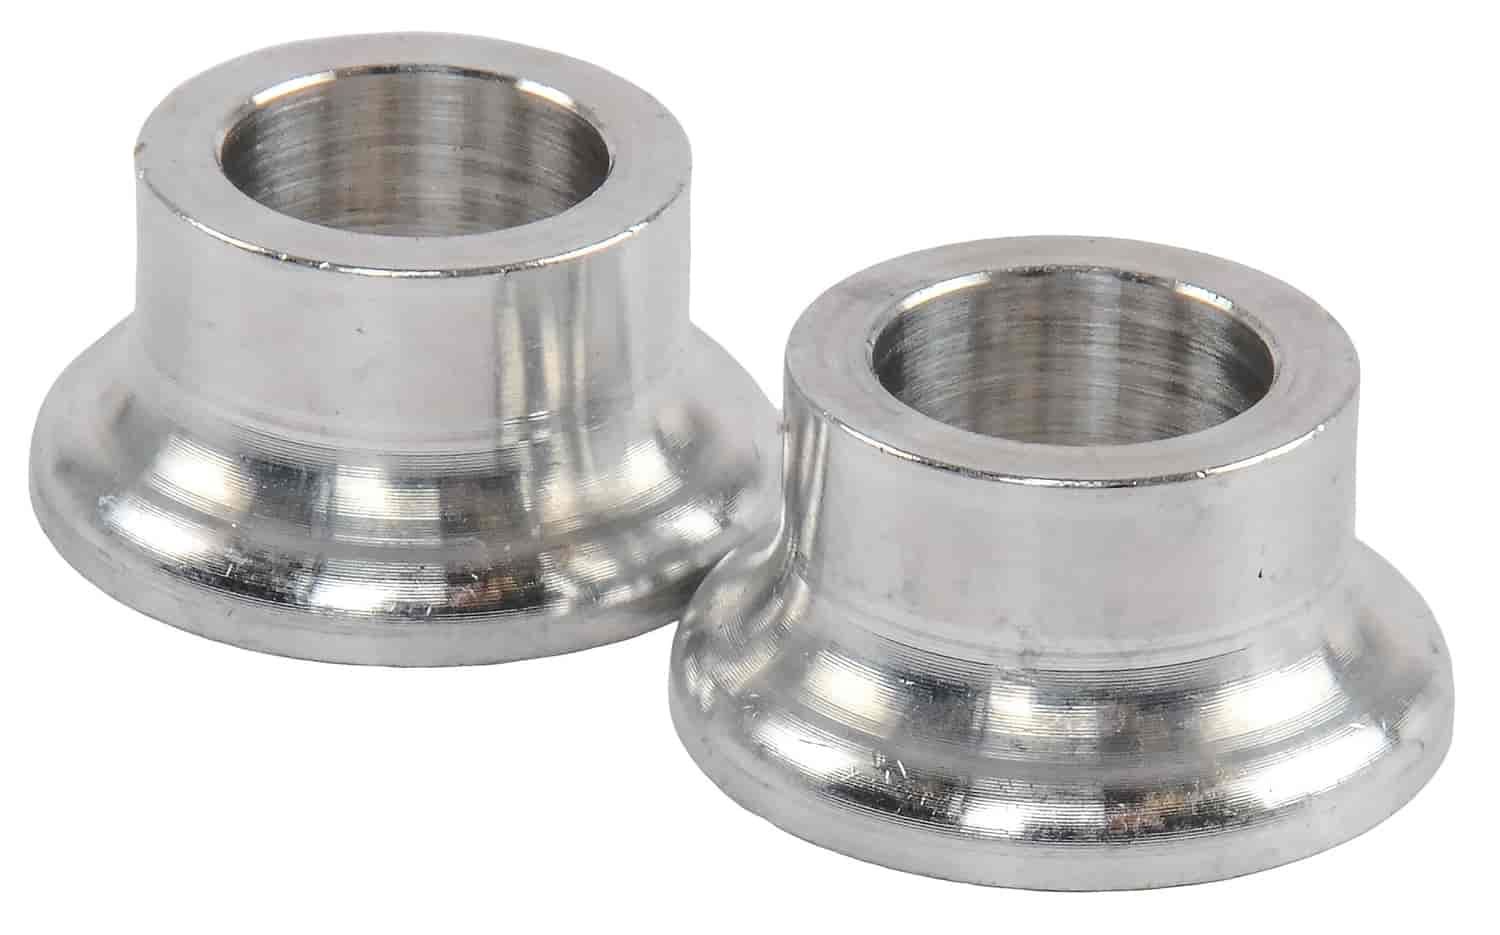 Aluminum Tapered Rod End Spacers 1/2 in. ID (Bolt Size) x 1/2 in. L